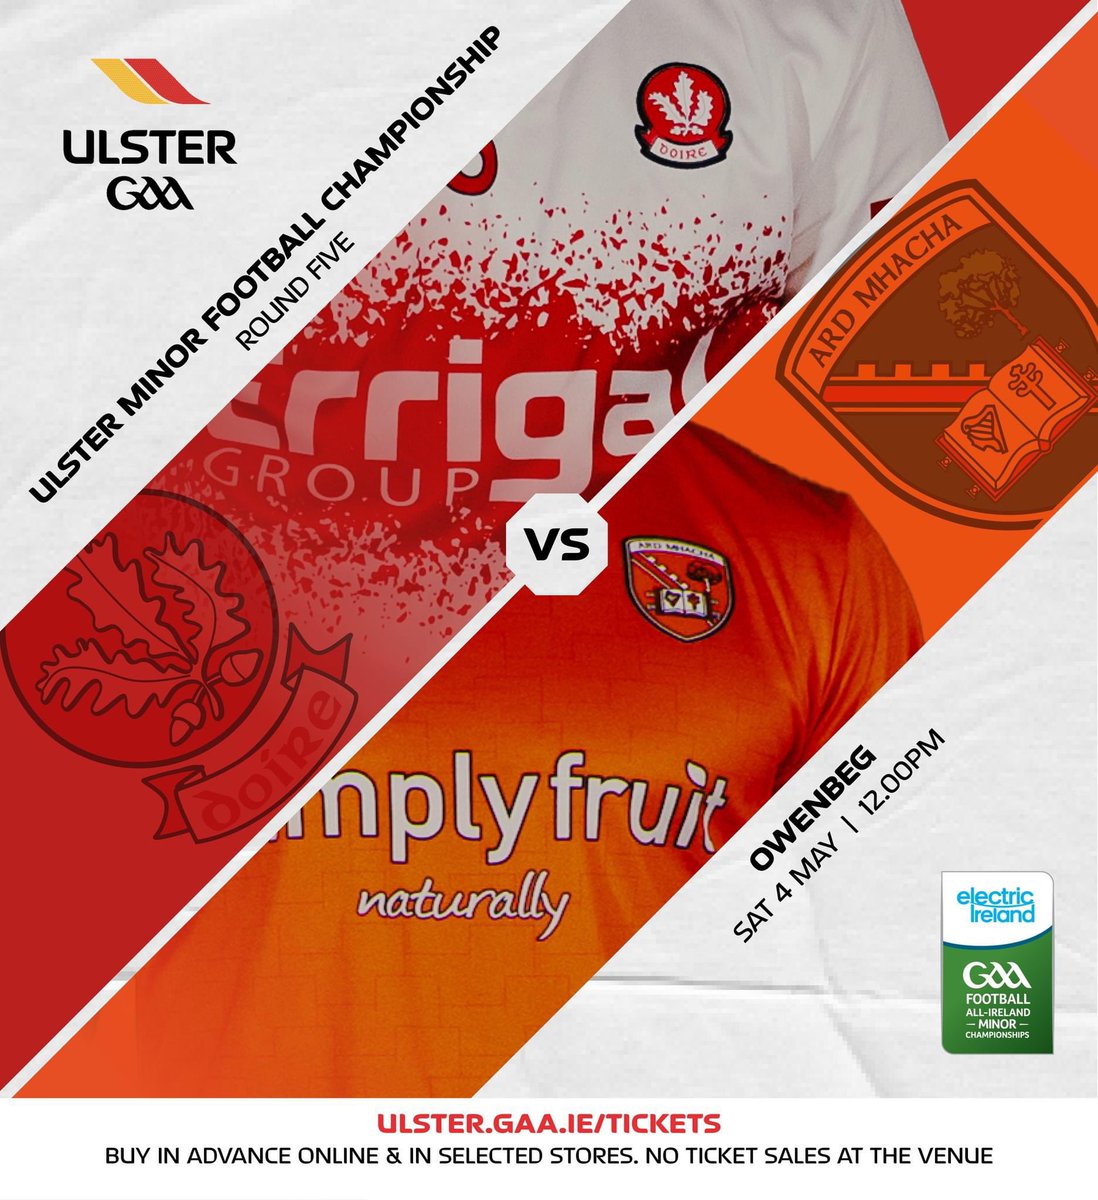 🏐🇦🇹 𝗠𝗜𝗡𝗢𝗥 𝗙𝗢𝗢𝗧𝗕𝗔𝗟𝗟

Derry face Armagh in the final round of Group B of the Ulster MFC. 

Follow this thread for match updates 🧵